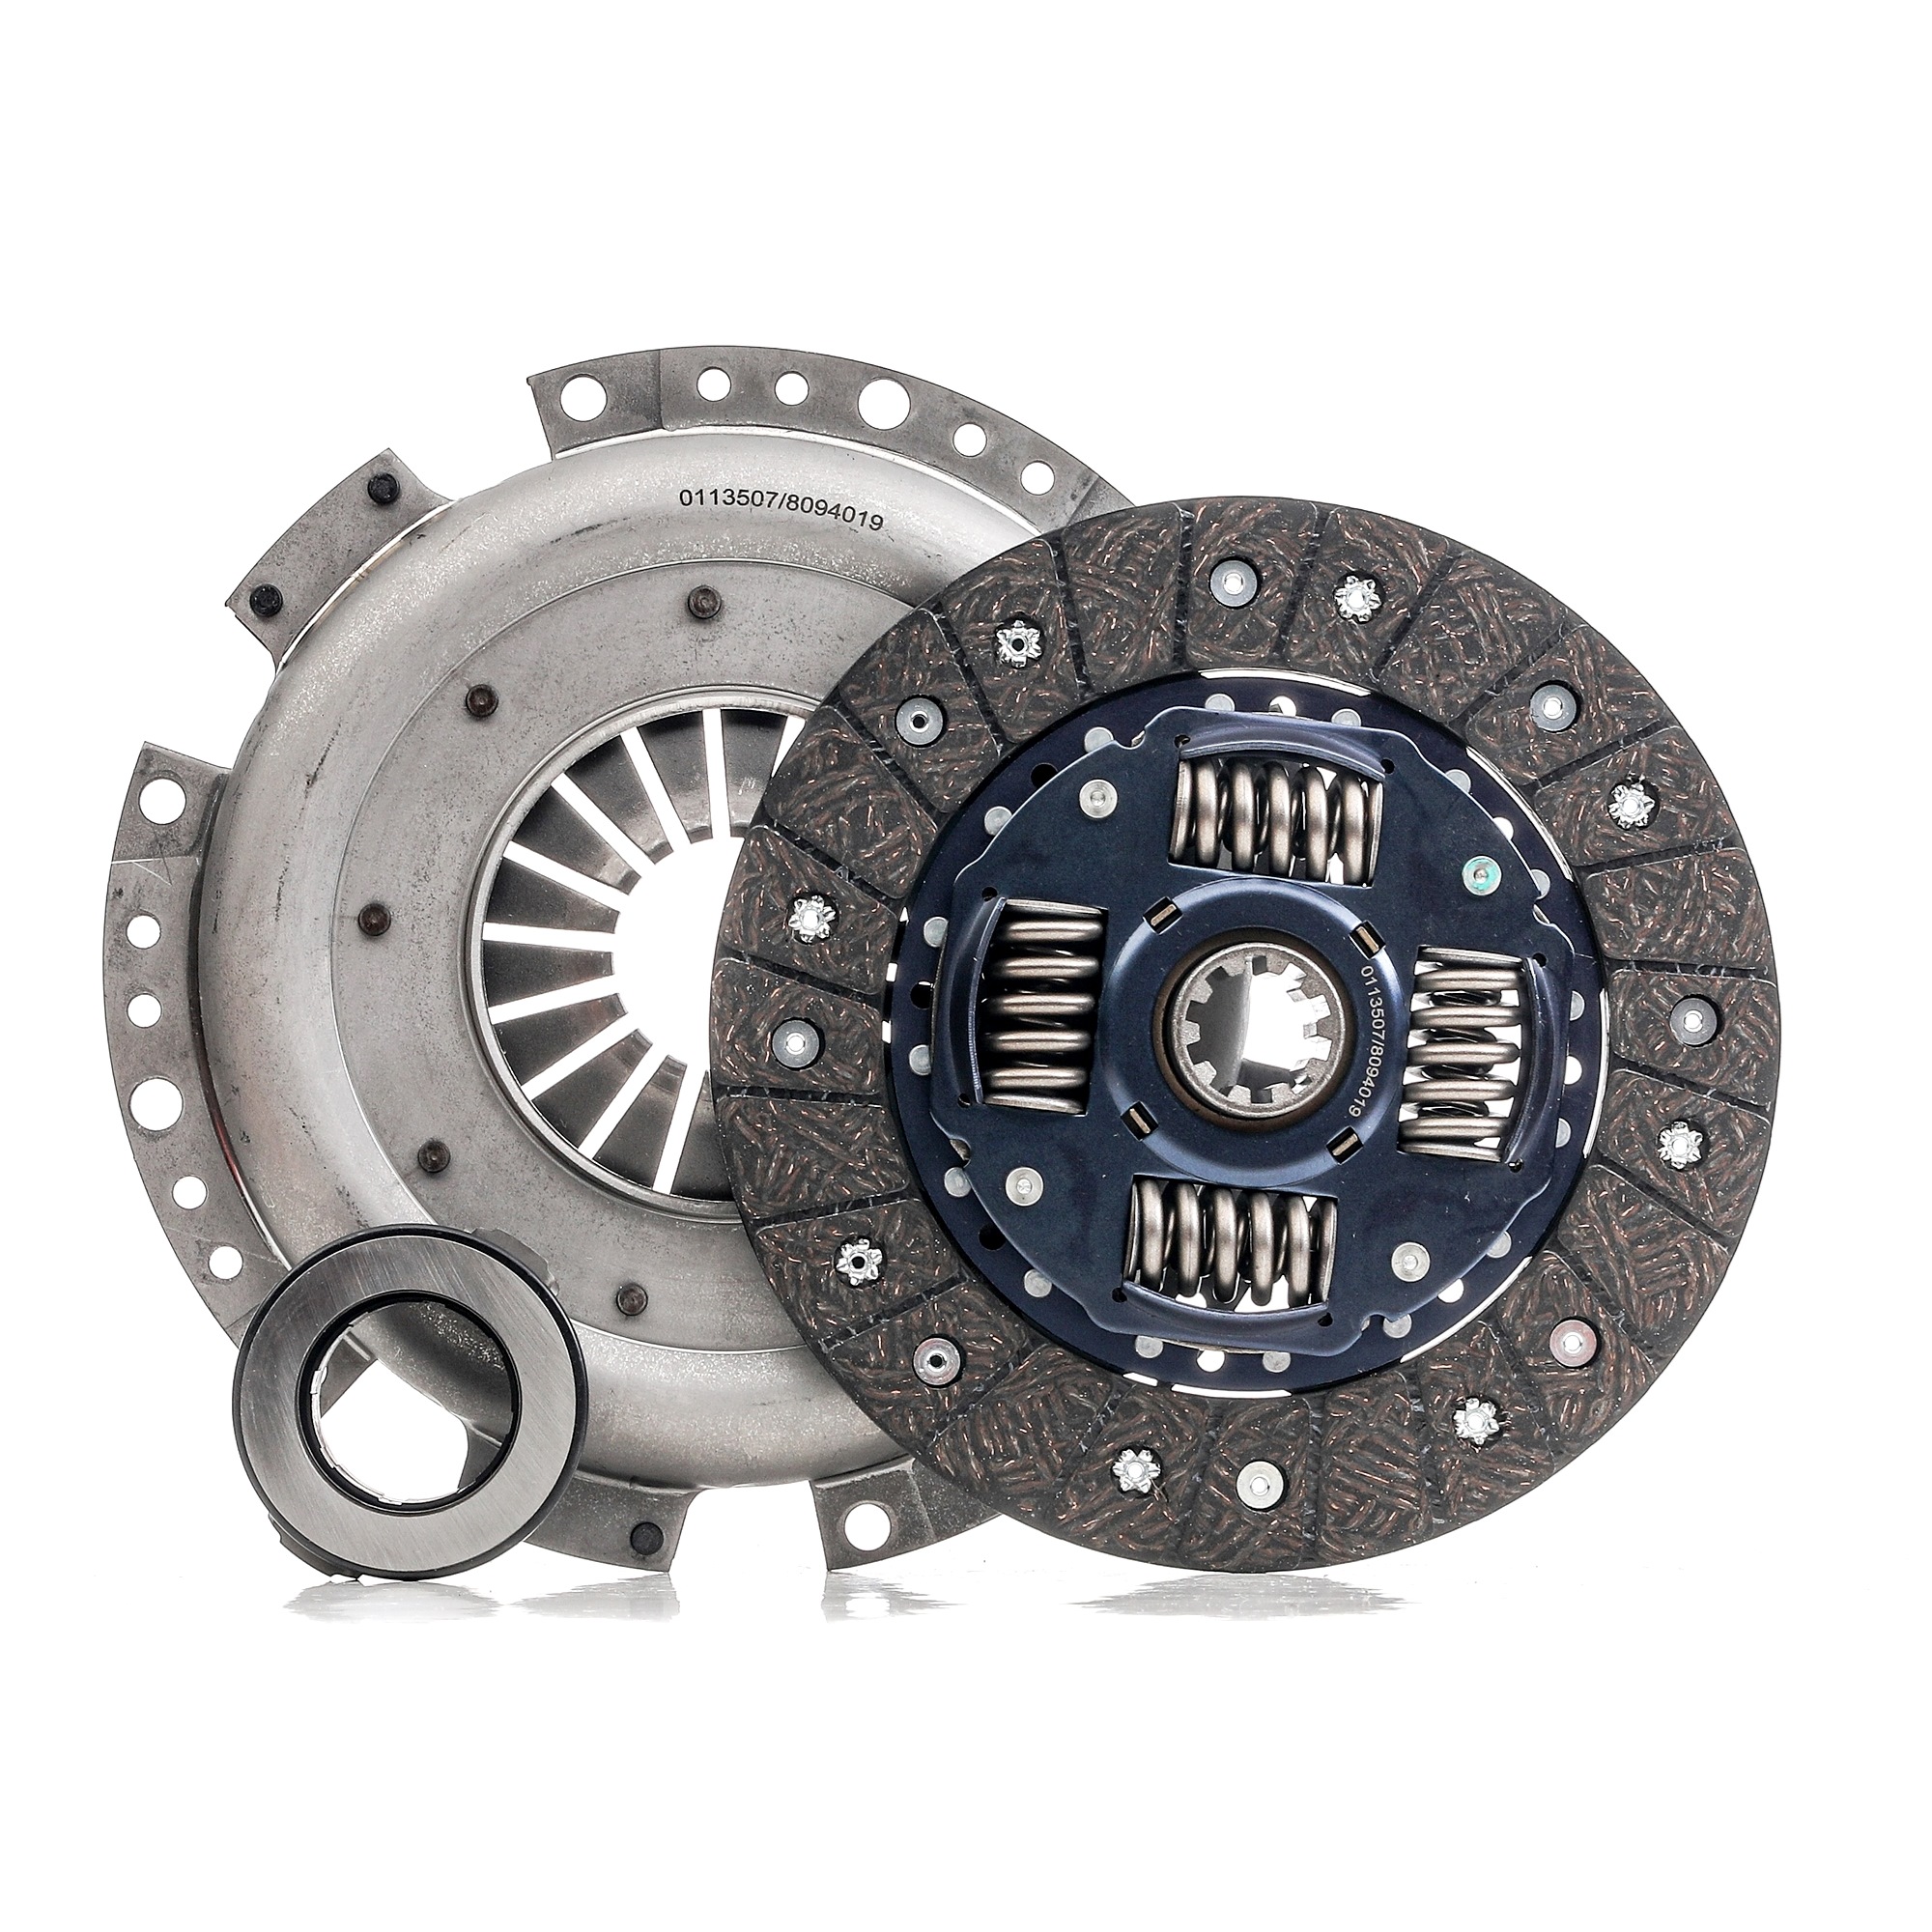 STARK SKCK-0100129 Clutch kit three-piece, with clutch release bearing, 215mm